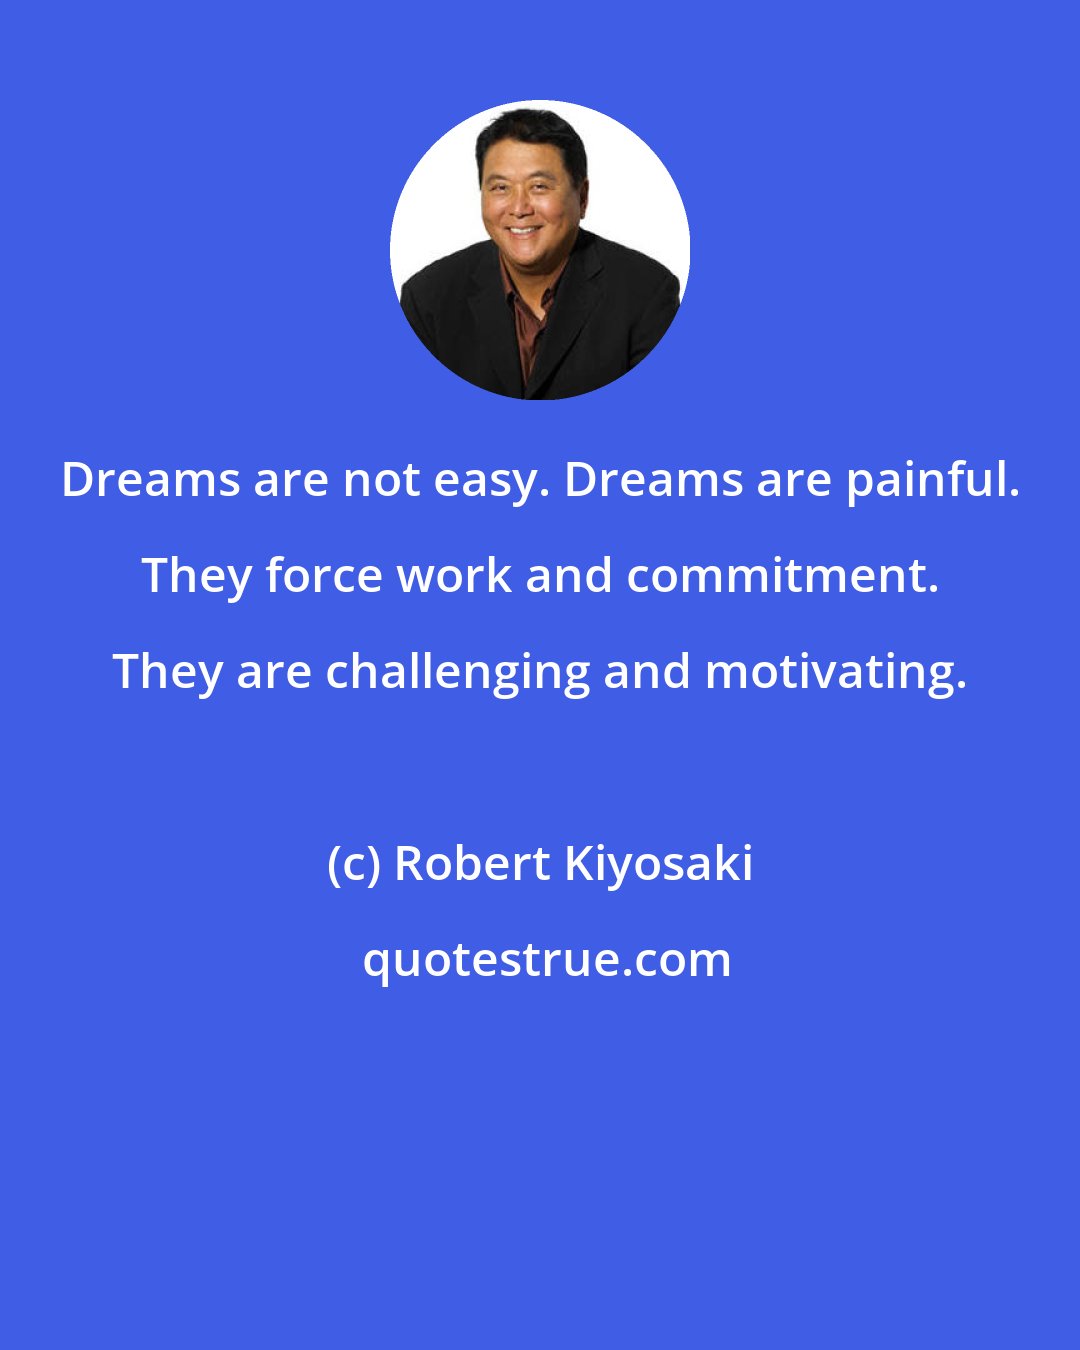 Robert Kiyosaki: Dreams are not easy. Dreams are painful. They force work and commitment. They are challenging and motivating.